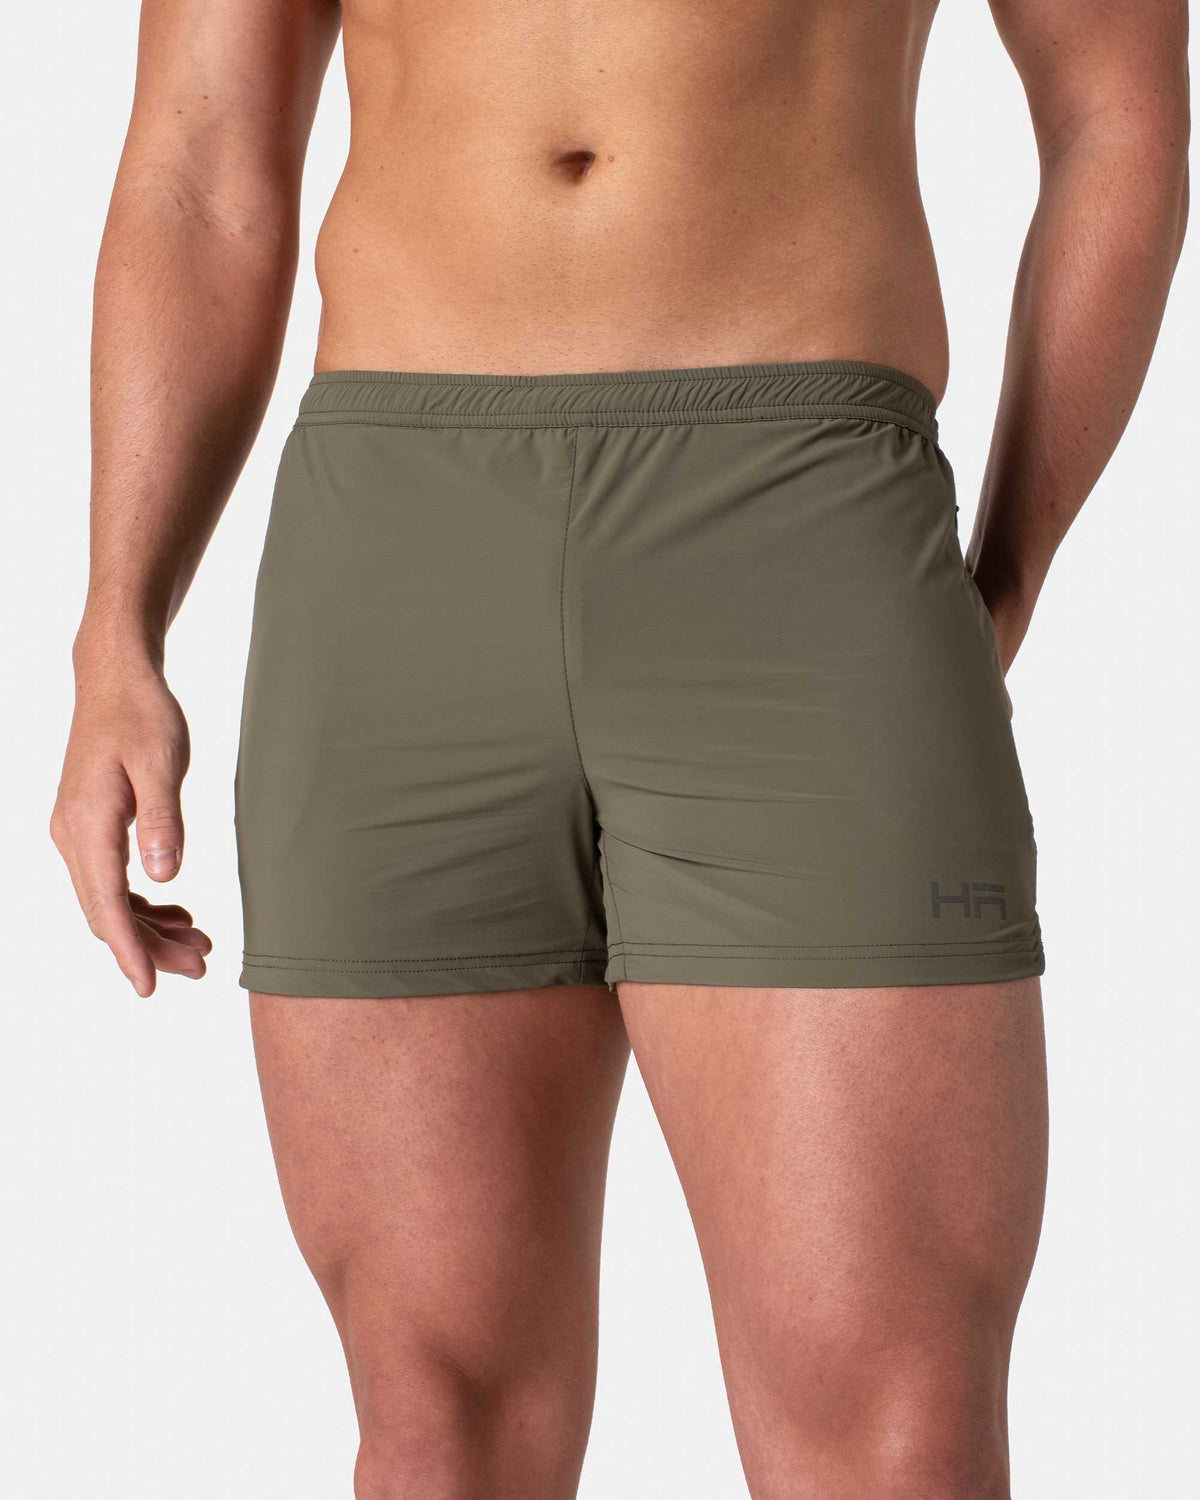  AIOIC $18.99! If you're looking for cute athletic shorts, I hi